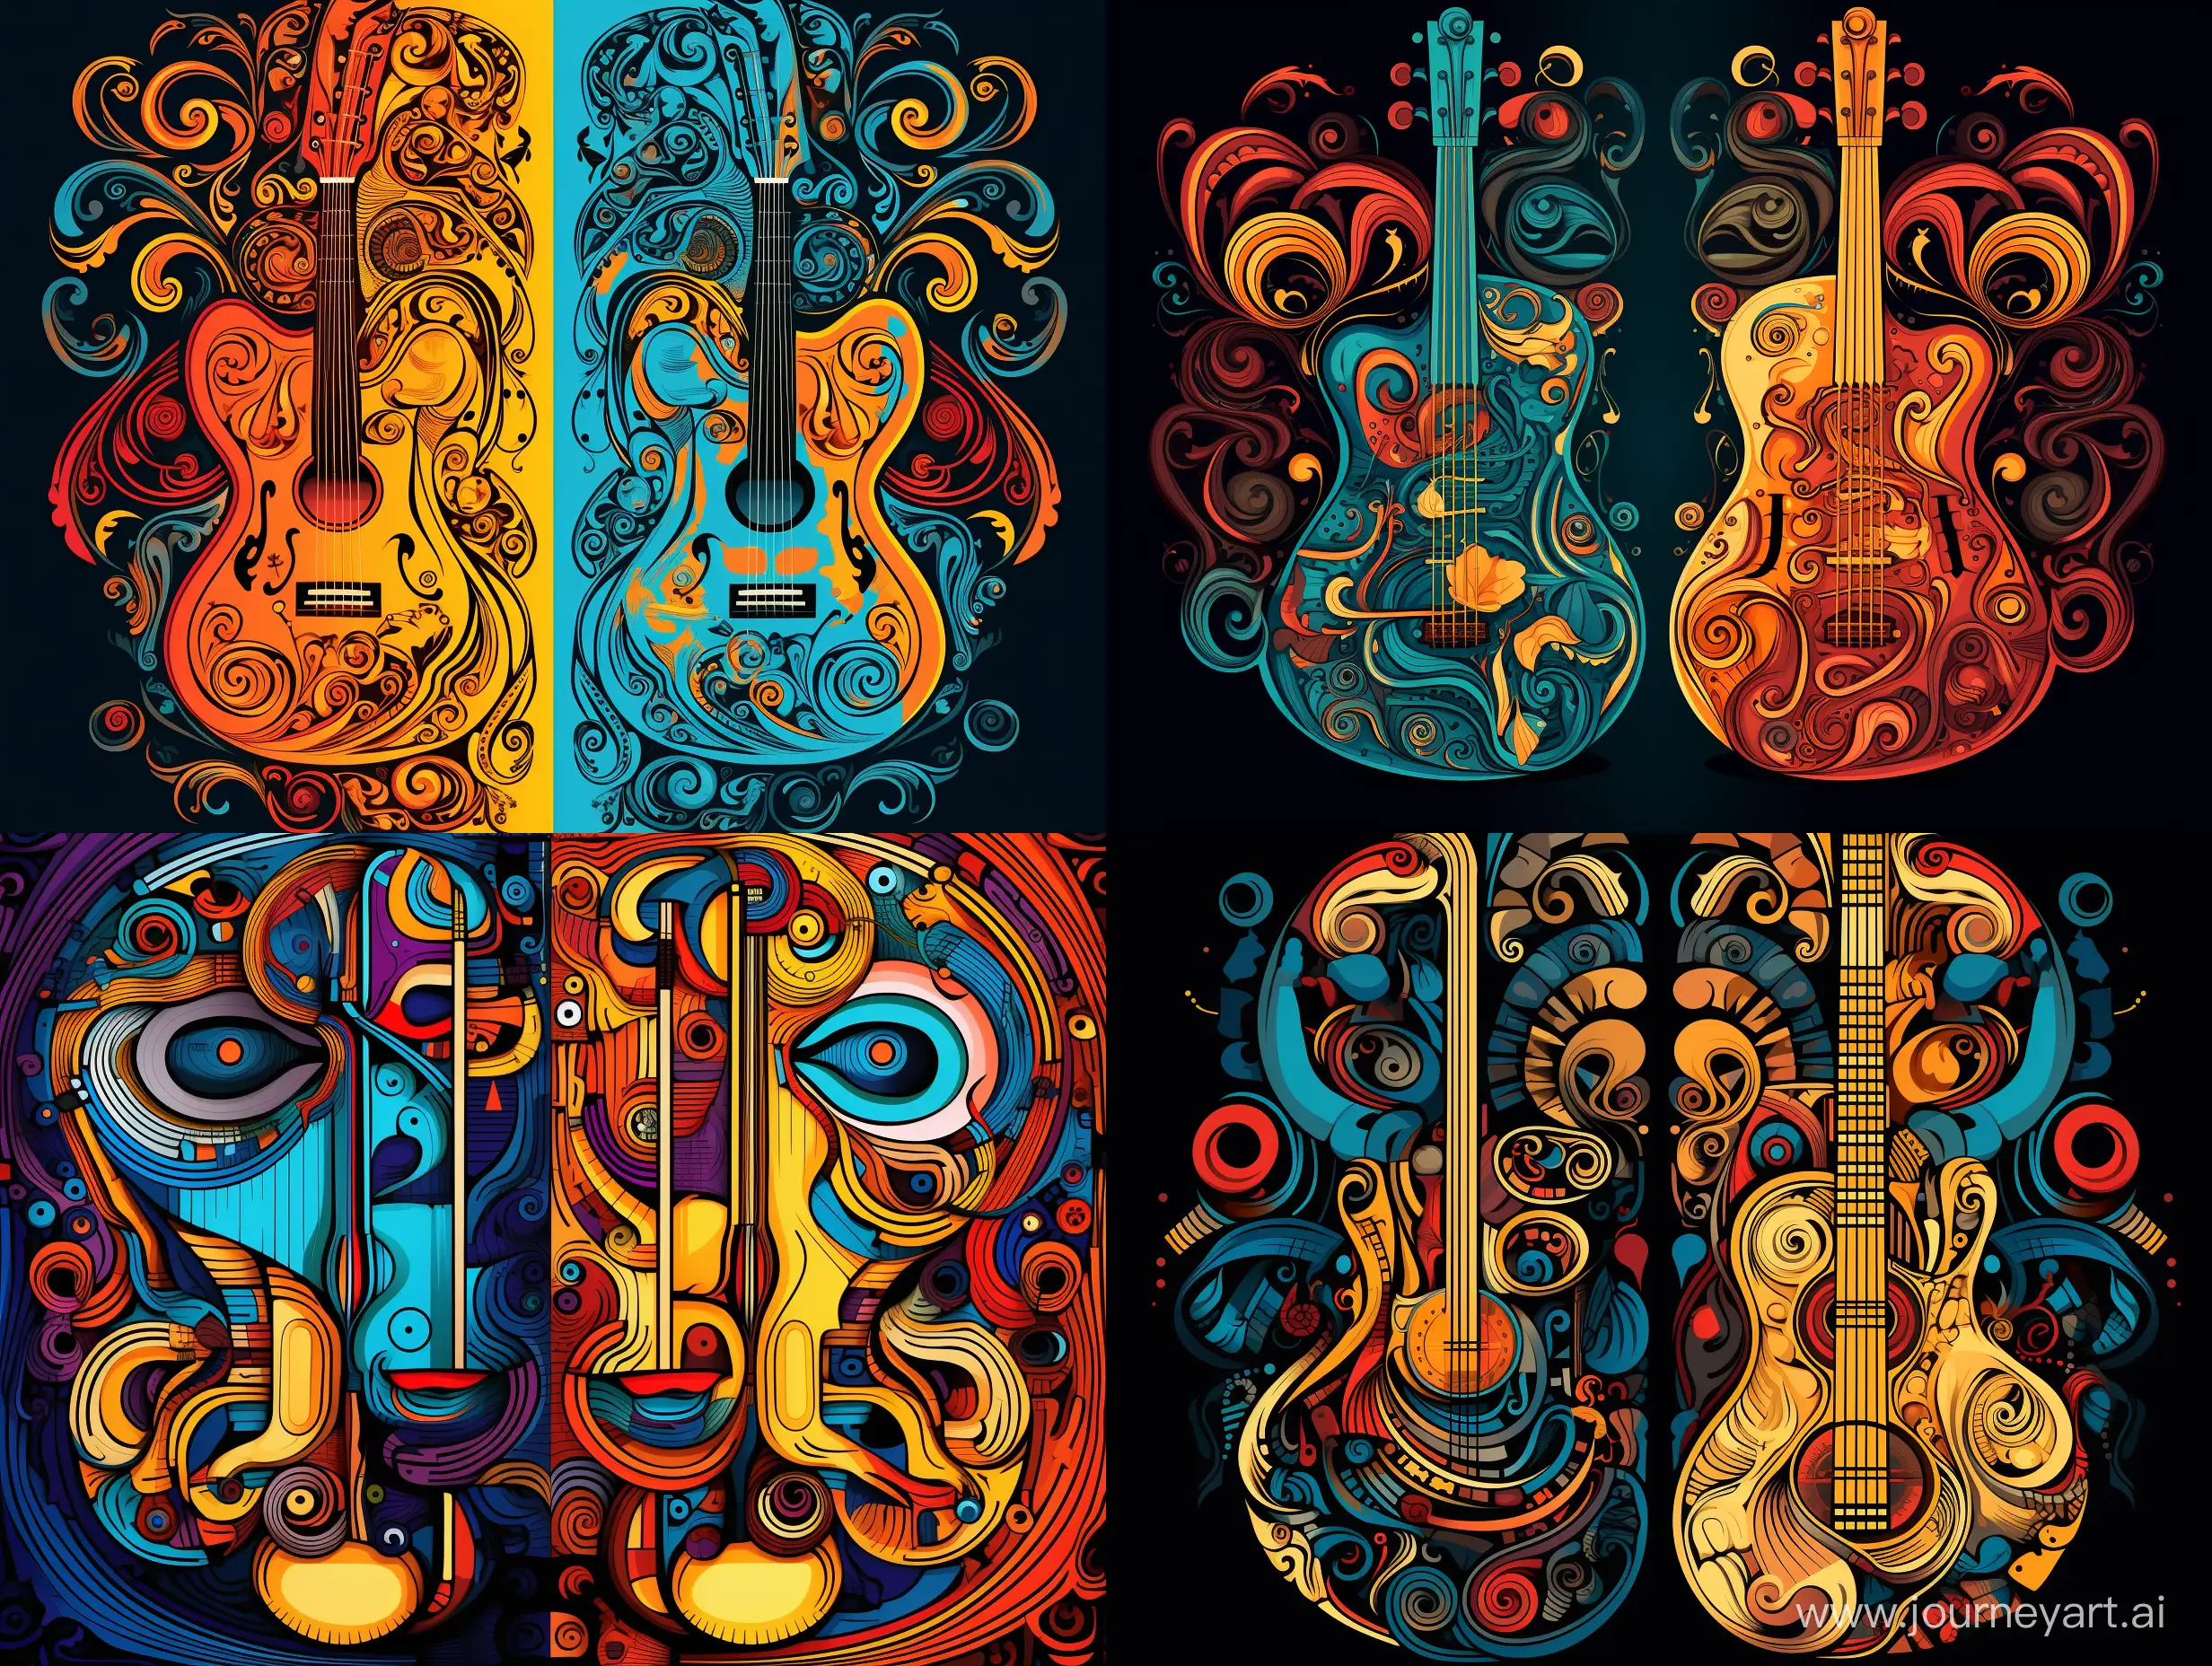 two variants of a symmetrical pattern of musical symbols, lots of details, complex colors, caricature, pop art style